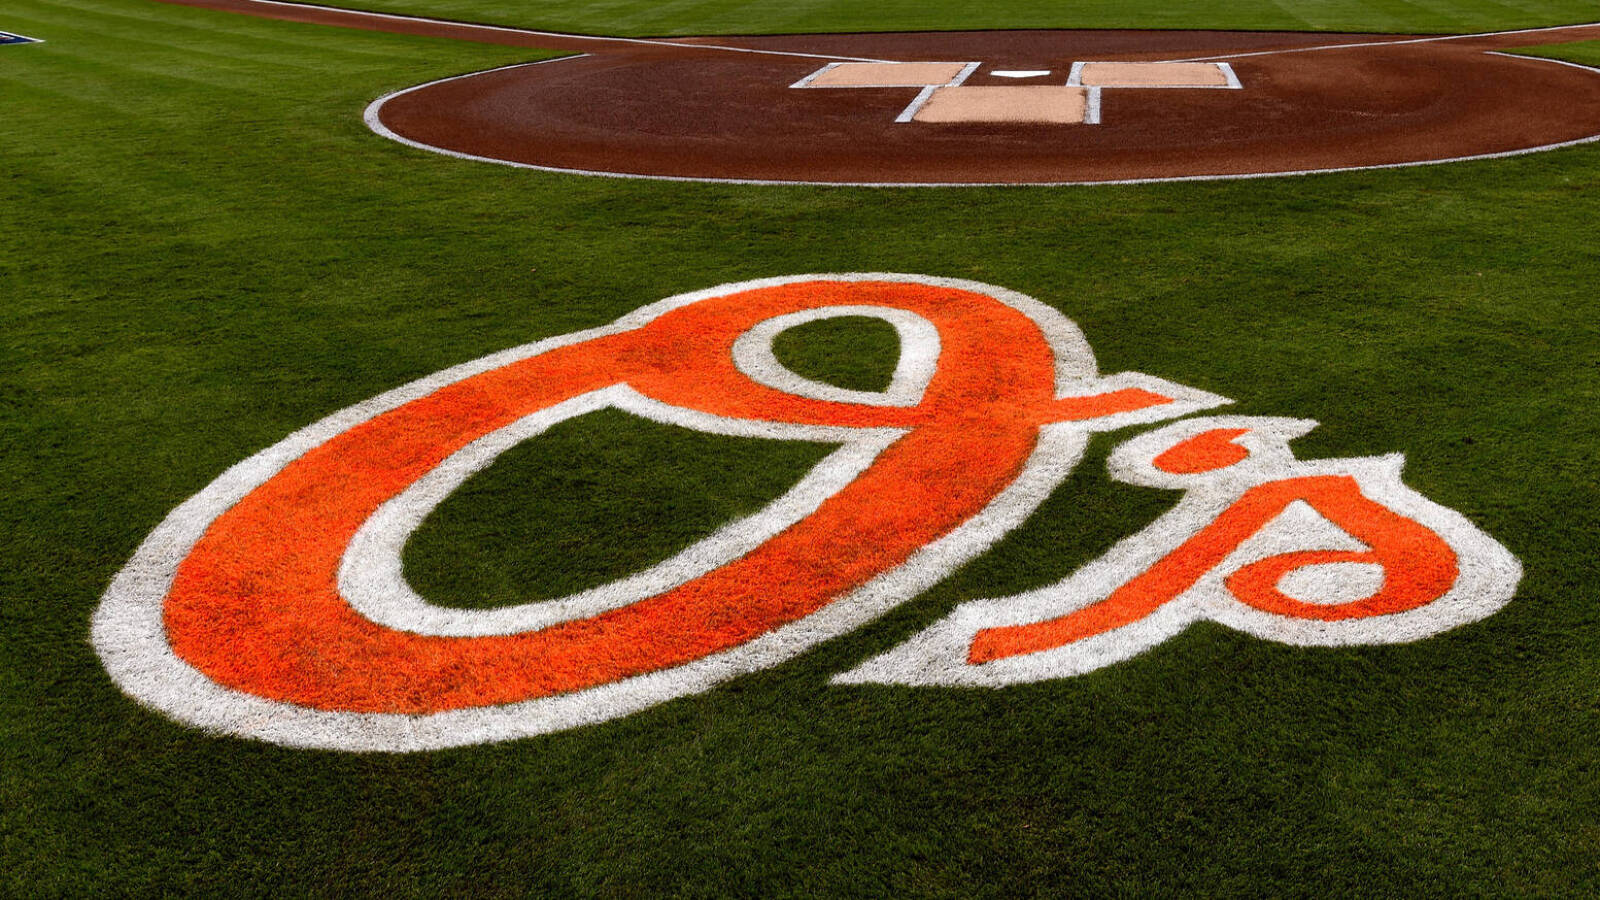 New York broadcasters come to defense of suspended Orioles announcer